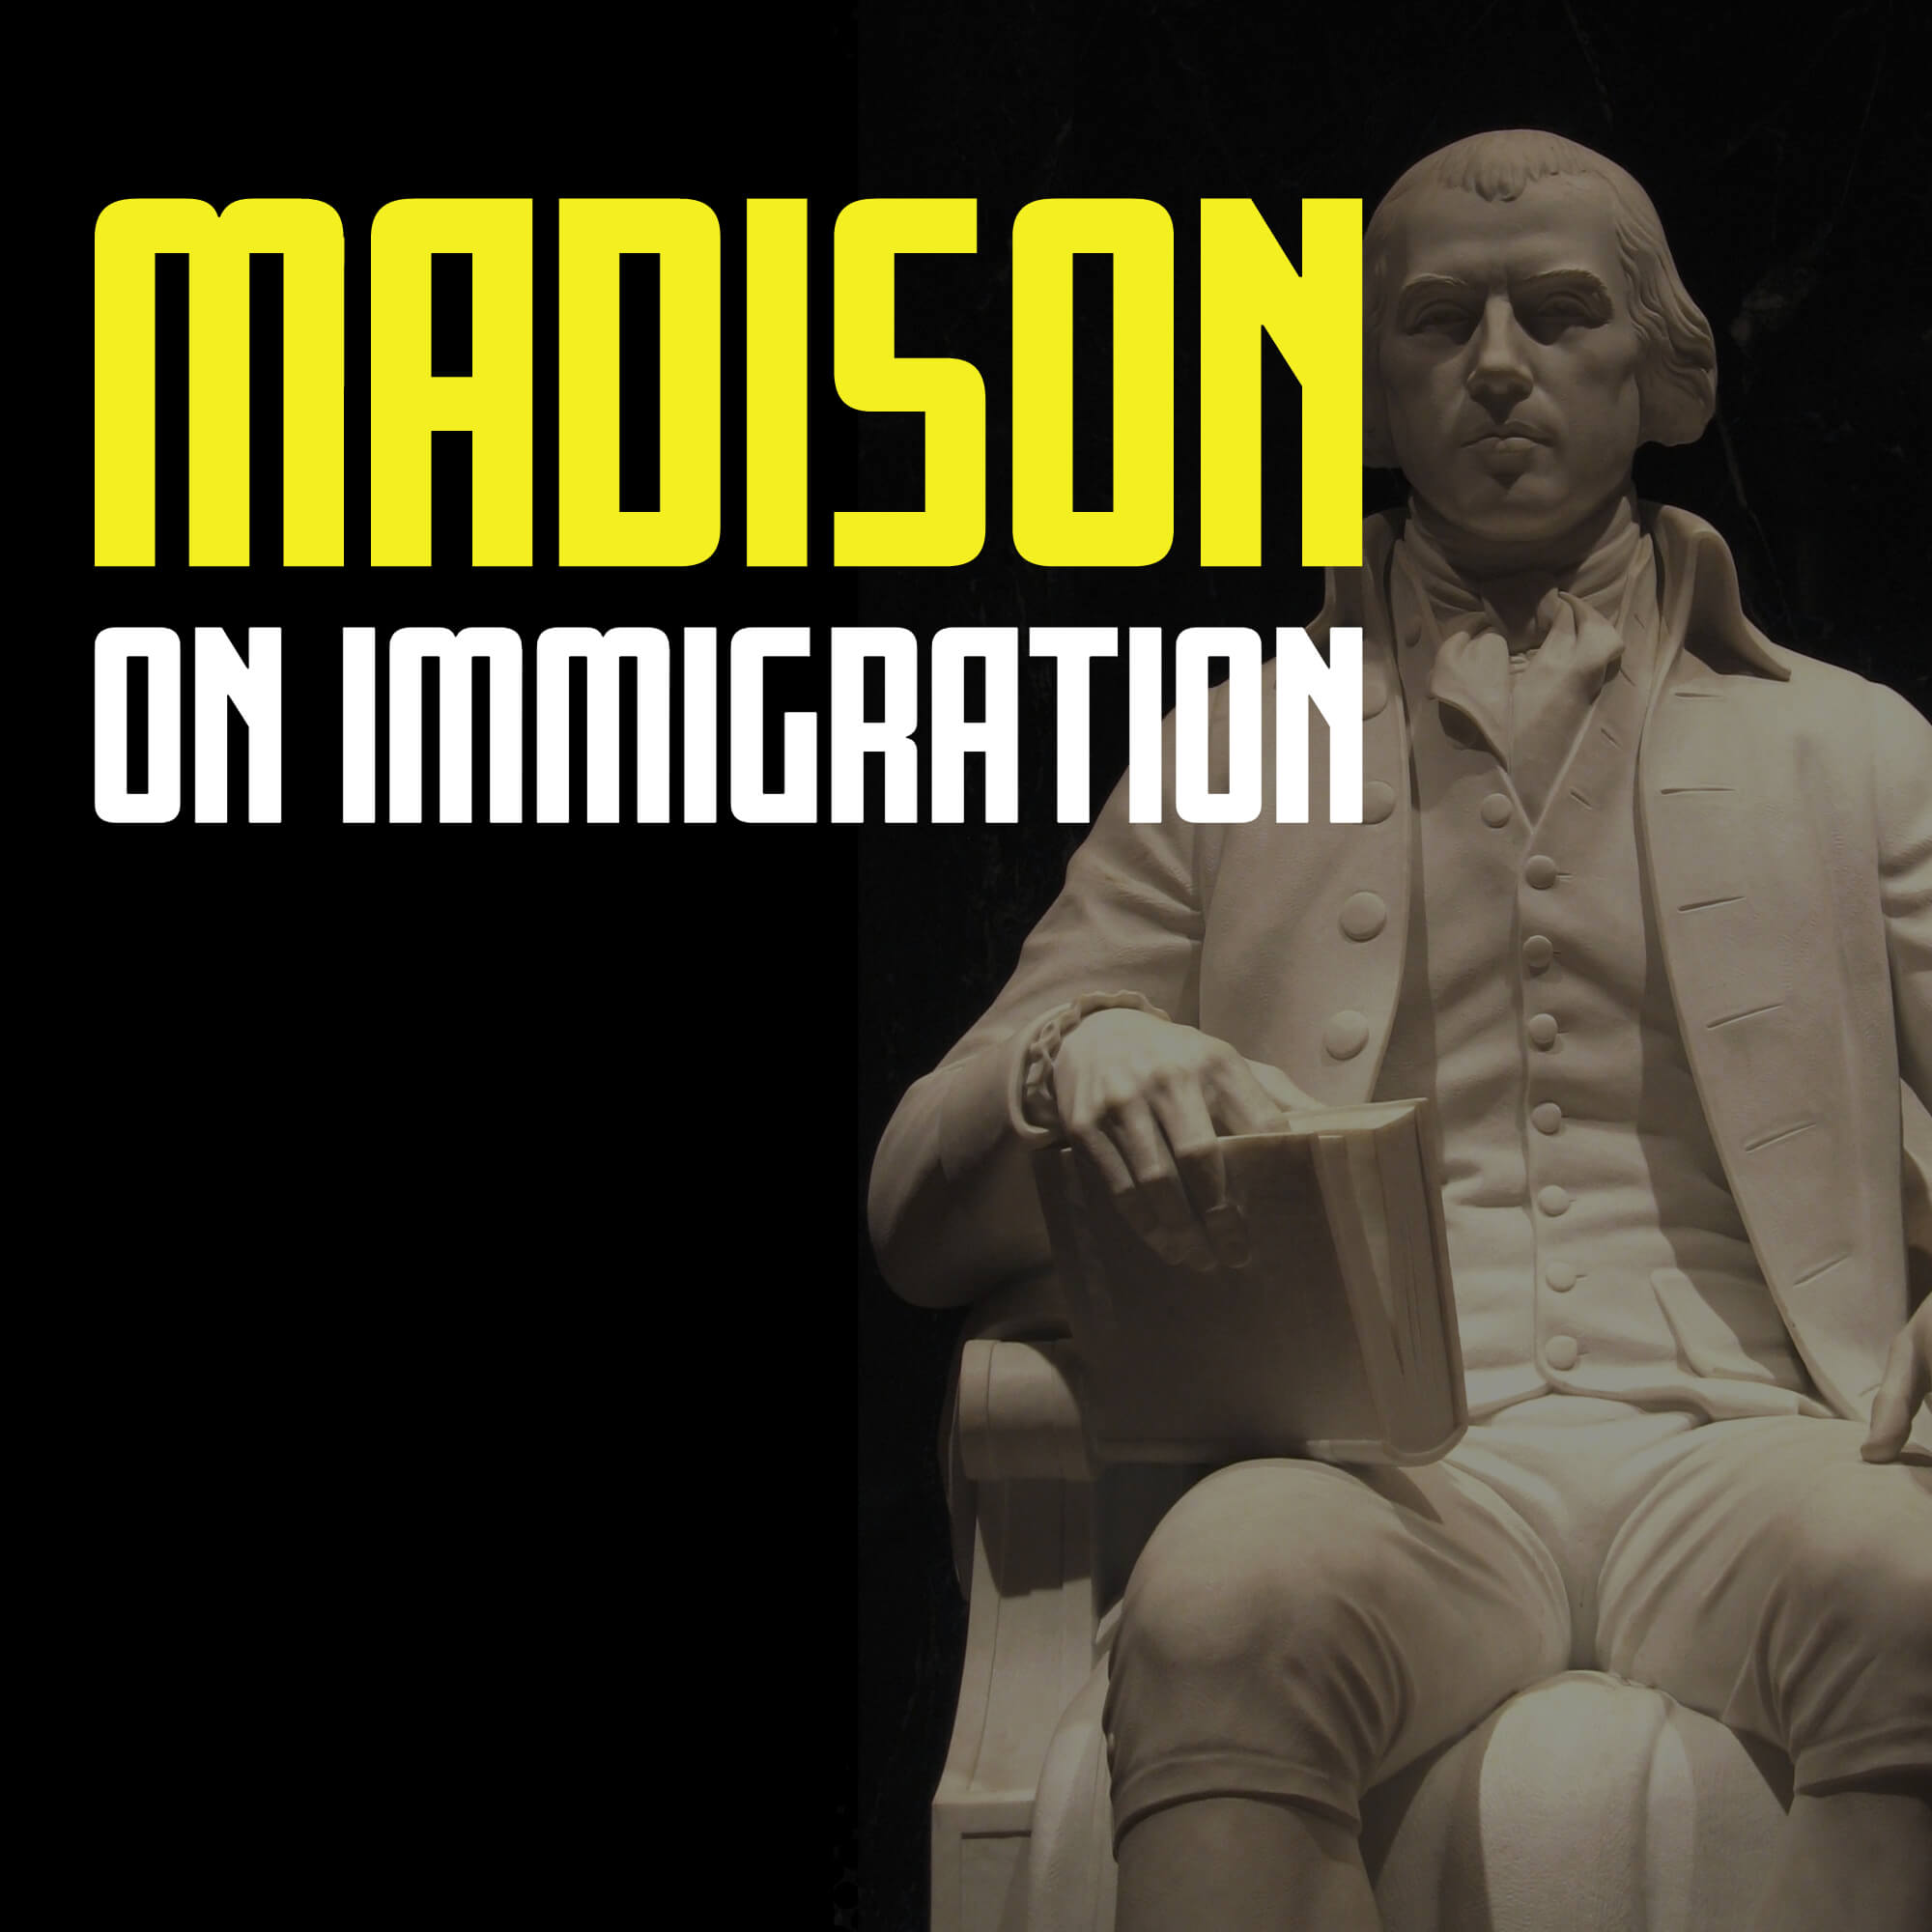 Immigration: James Madison’s View